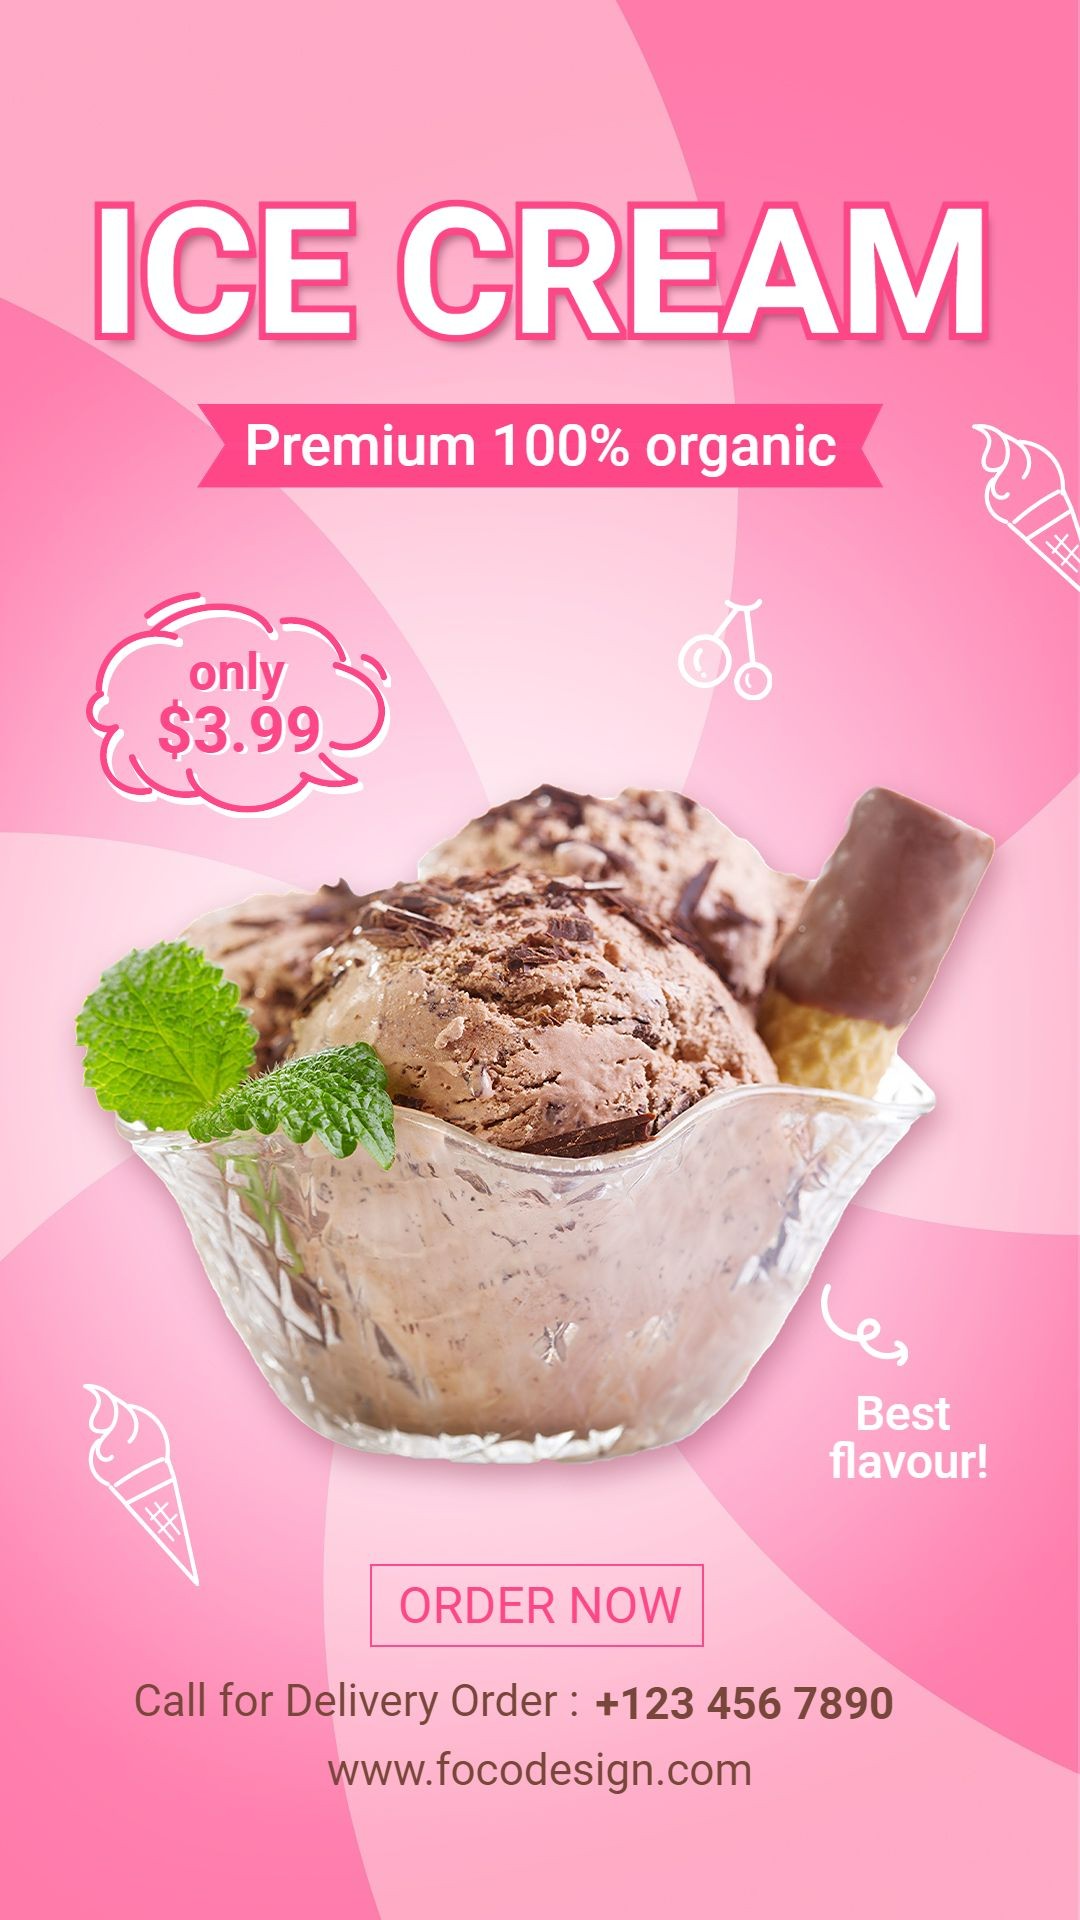 Chocolate Ice Cream Consumer Packaged Fast Food Snacks Ecommerce Story预览效果